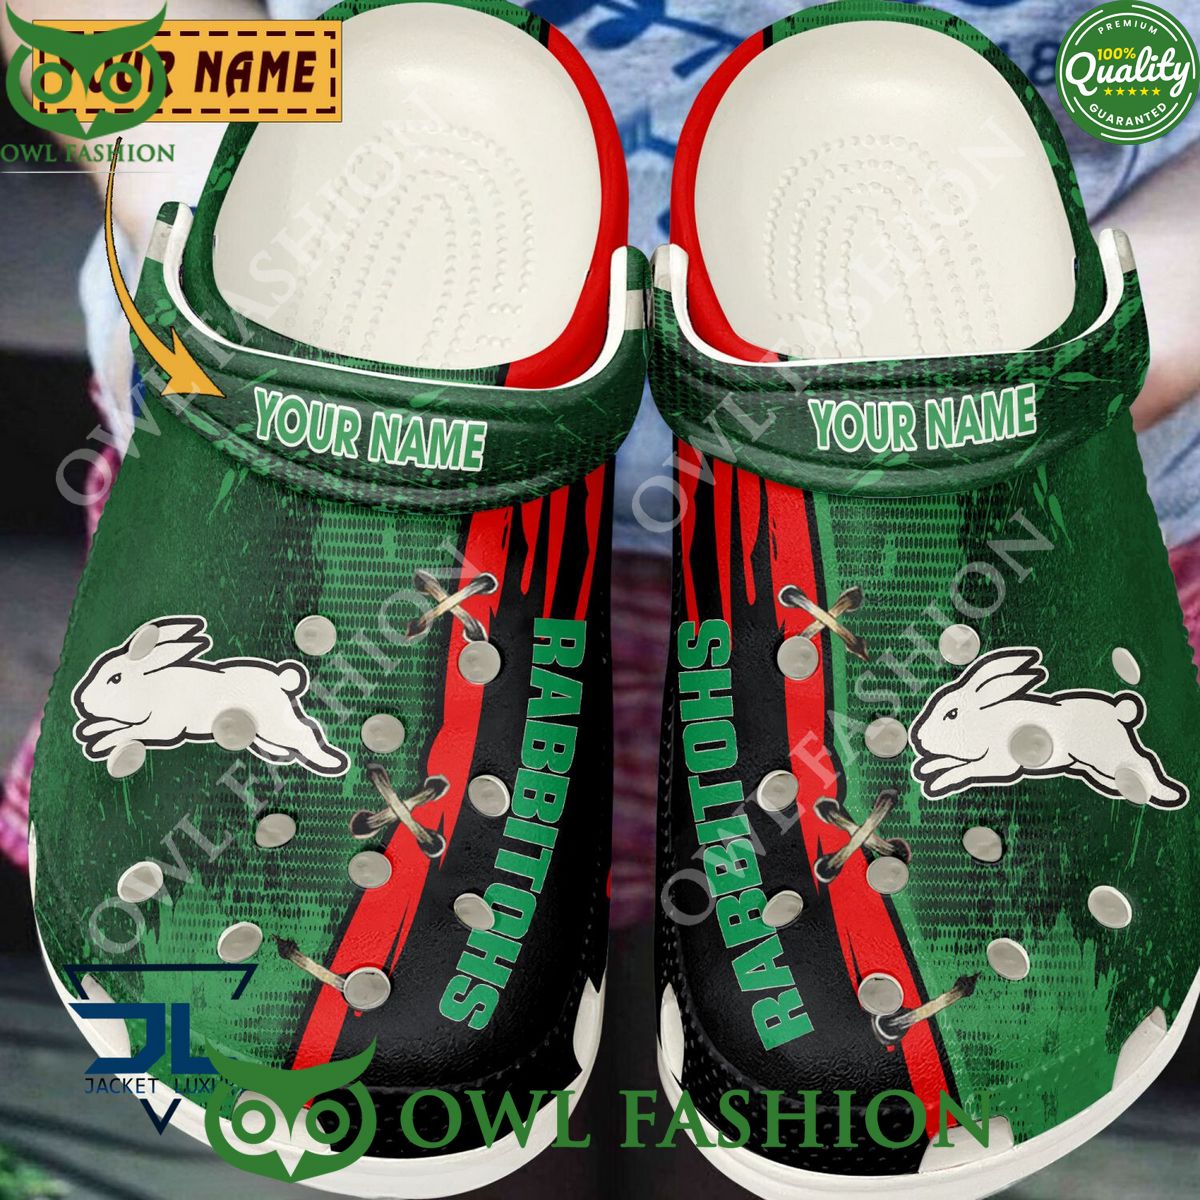 South Sydney Rabbitohs Personalized Rugby League Crocs